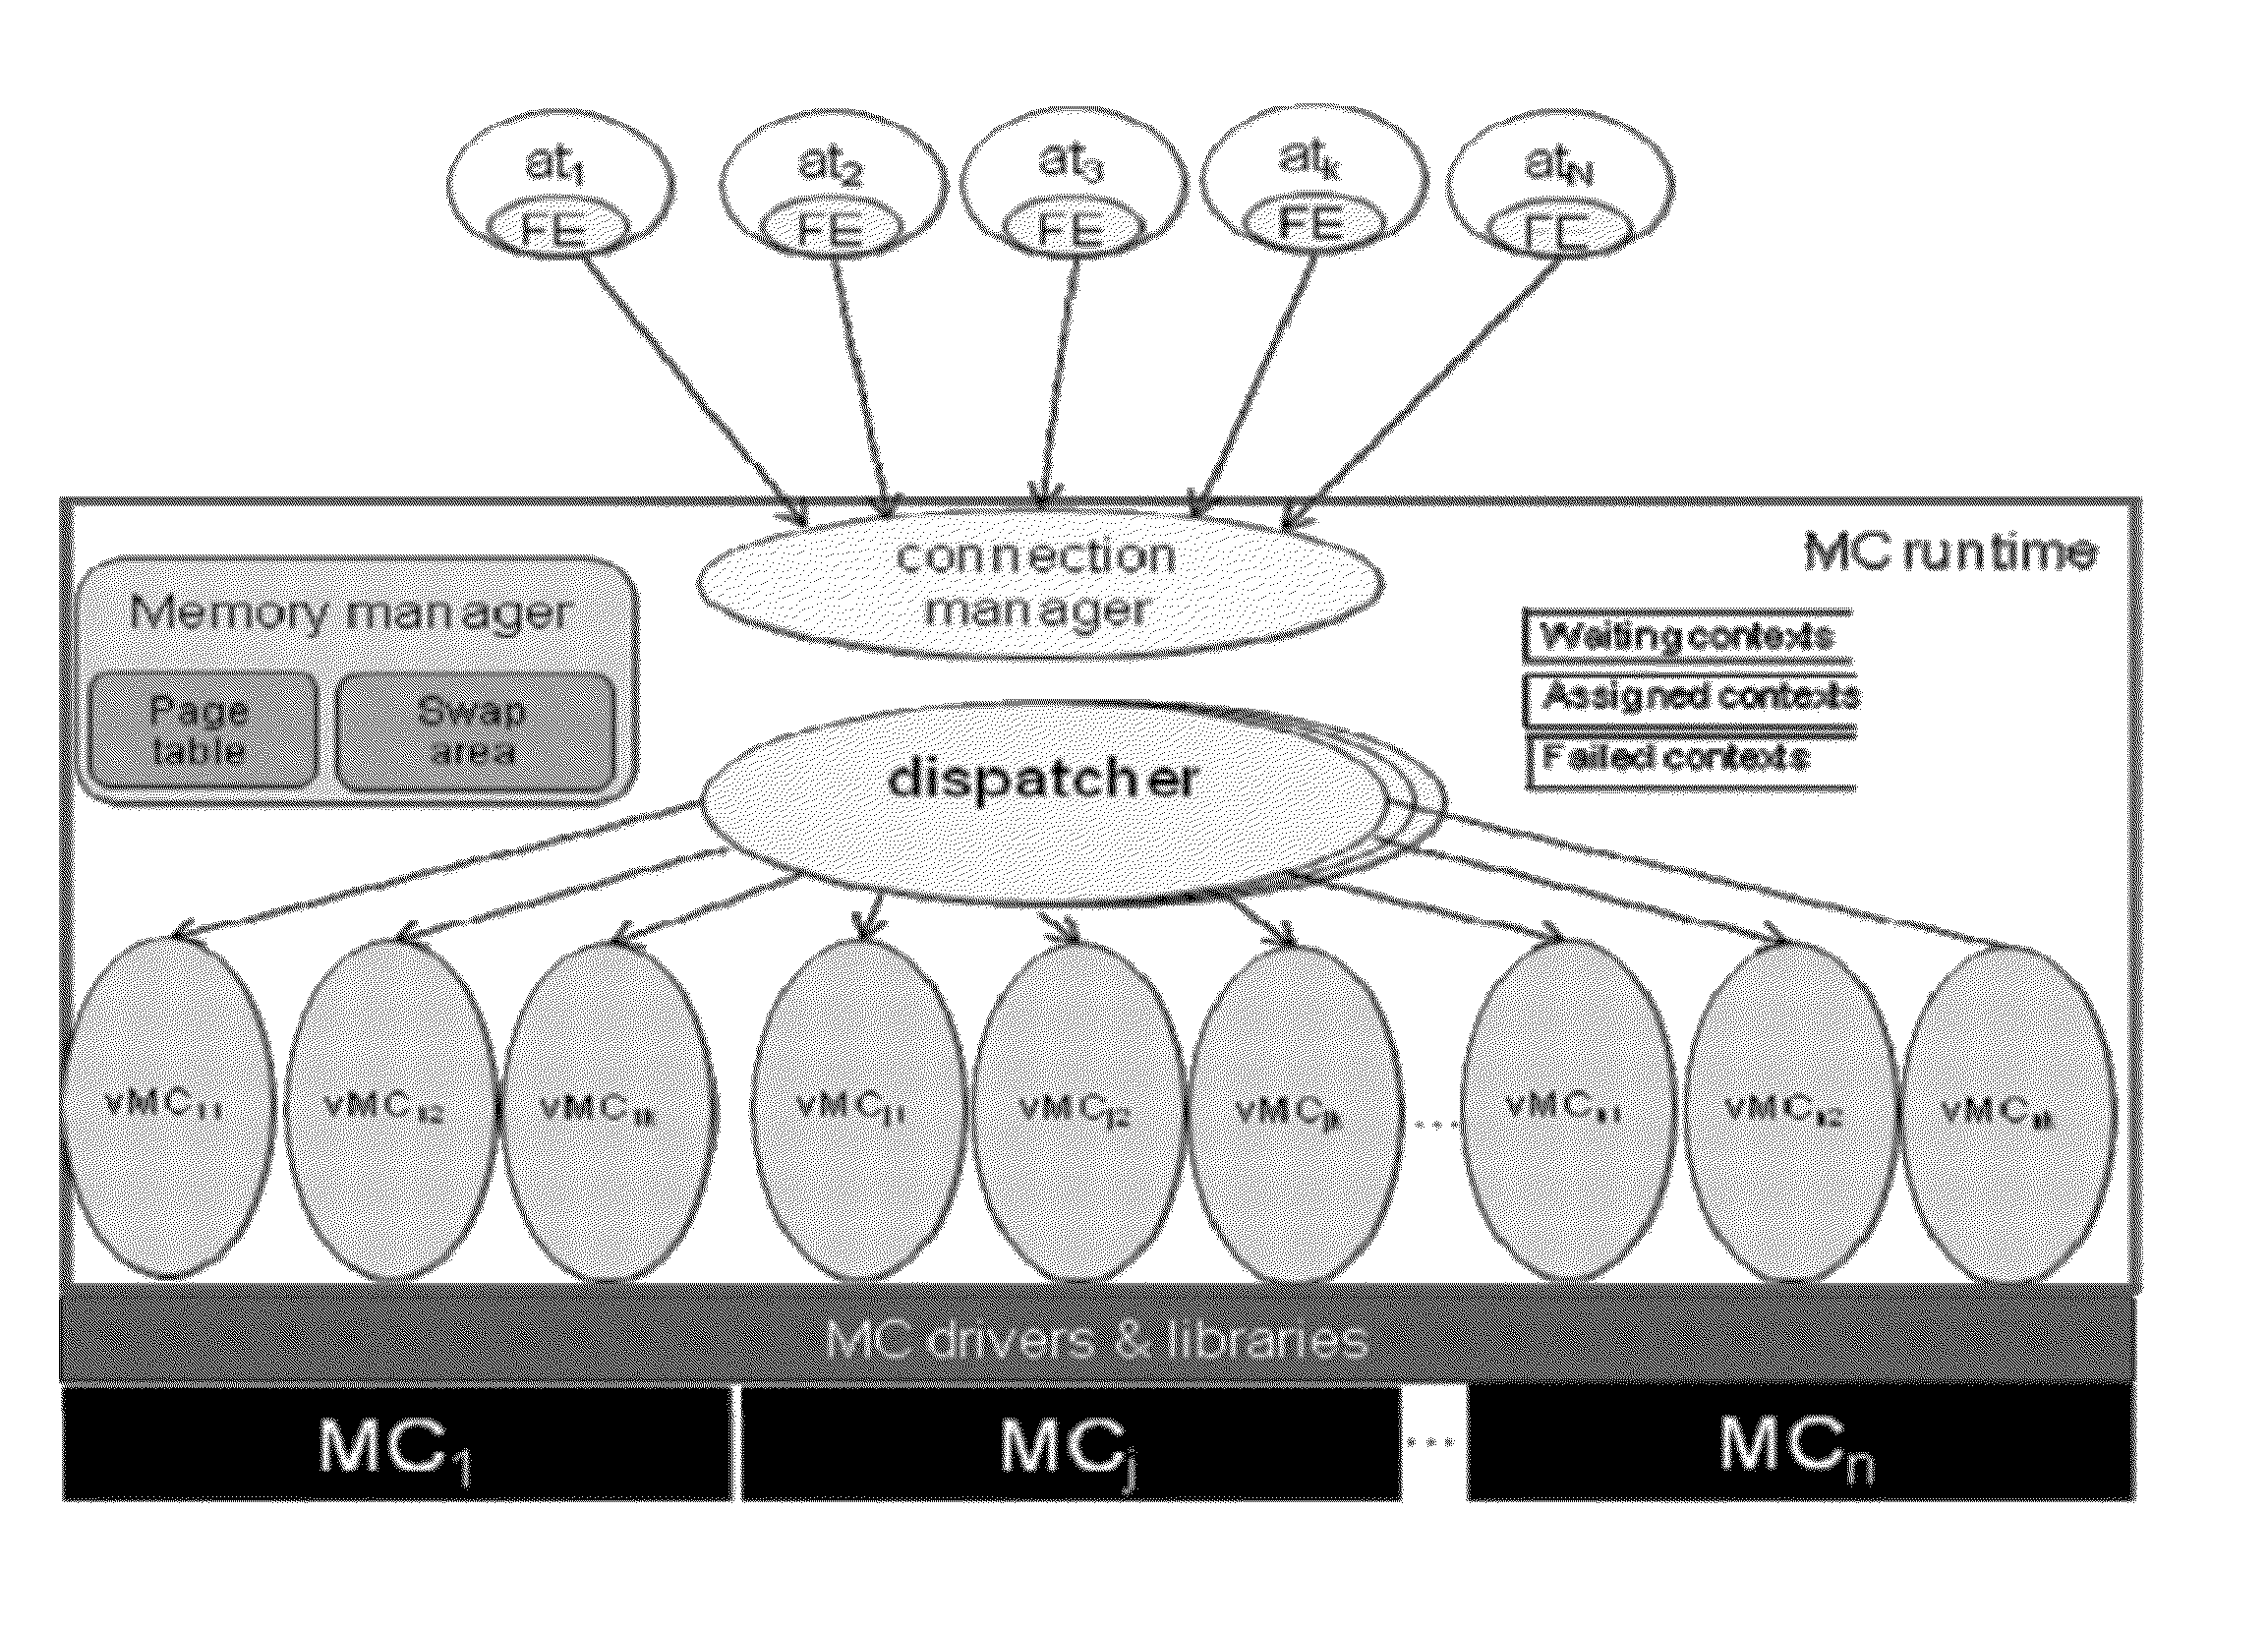 Method and System for Memory Aware Runtime to Support Multitenancy in Heterogeneous Clusters